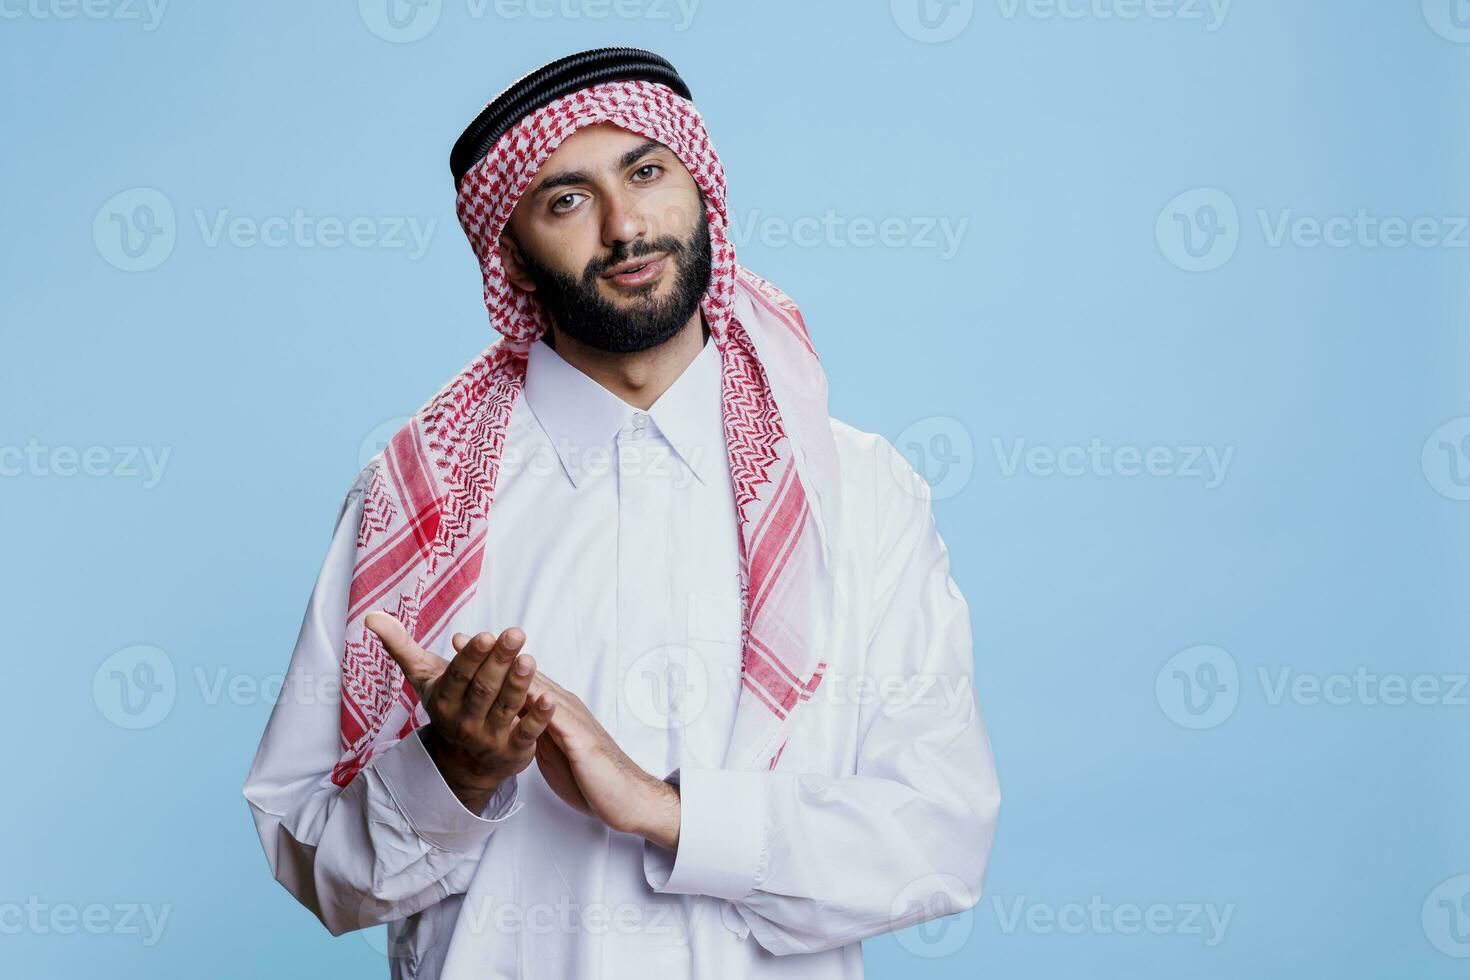 Arab man dressed in traditional islamic clothes making applause, congratulating and looking at camera with confident expression. Muslim person wearing thobe applauding studio portrait photo